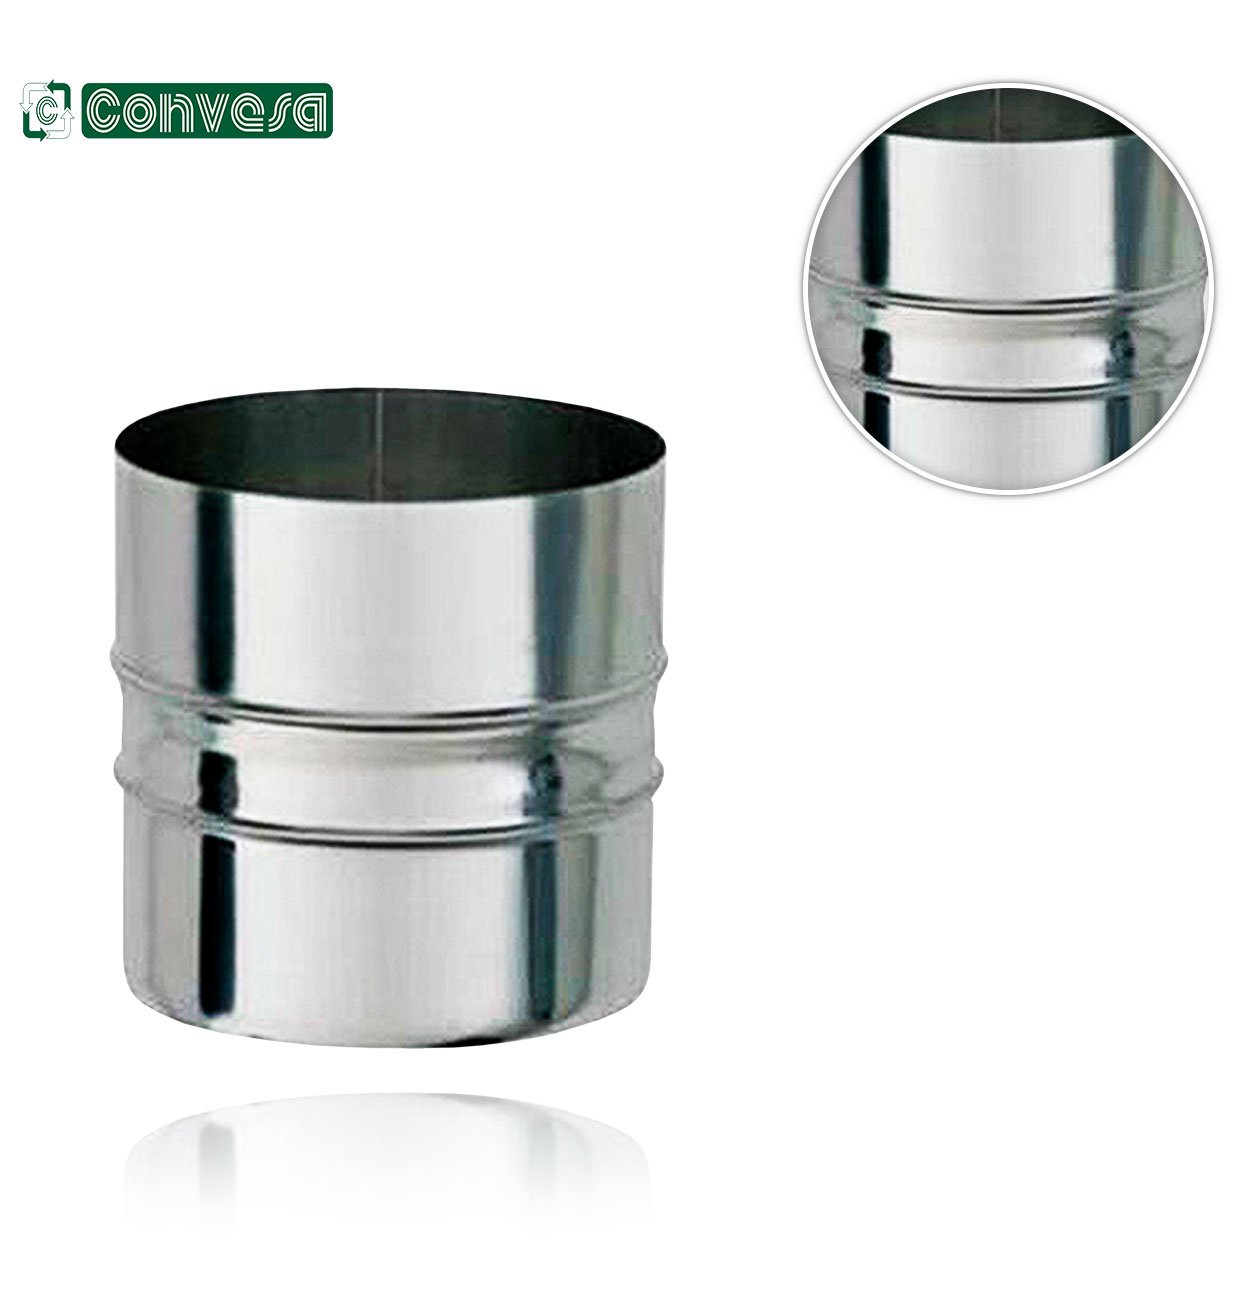 DOUBLE WALL-MOUNTED SINGLE CONNECTING SLEEVE+250 diameter STAINLESS STEEL CLAMP